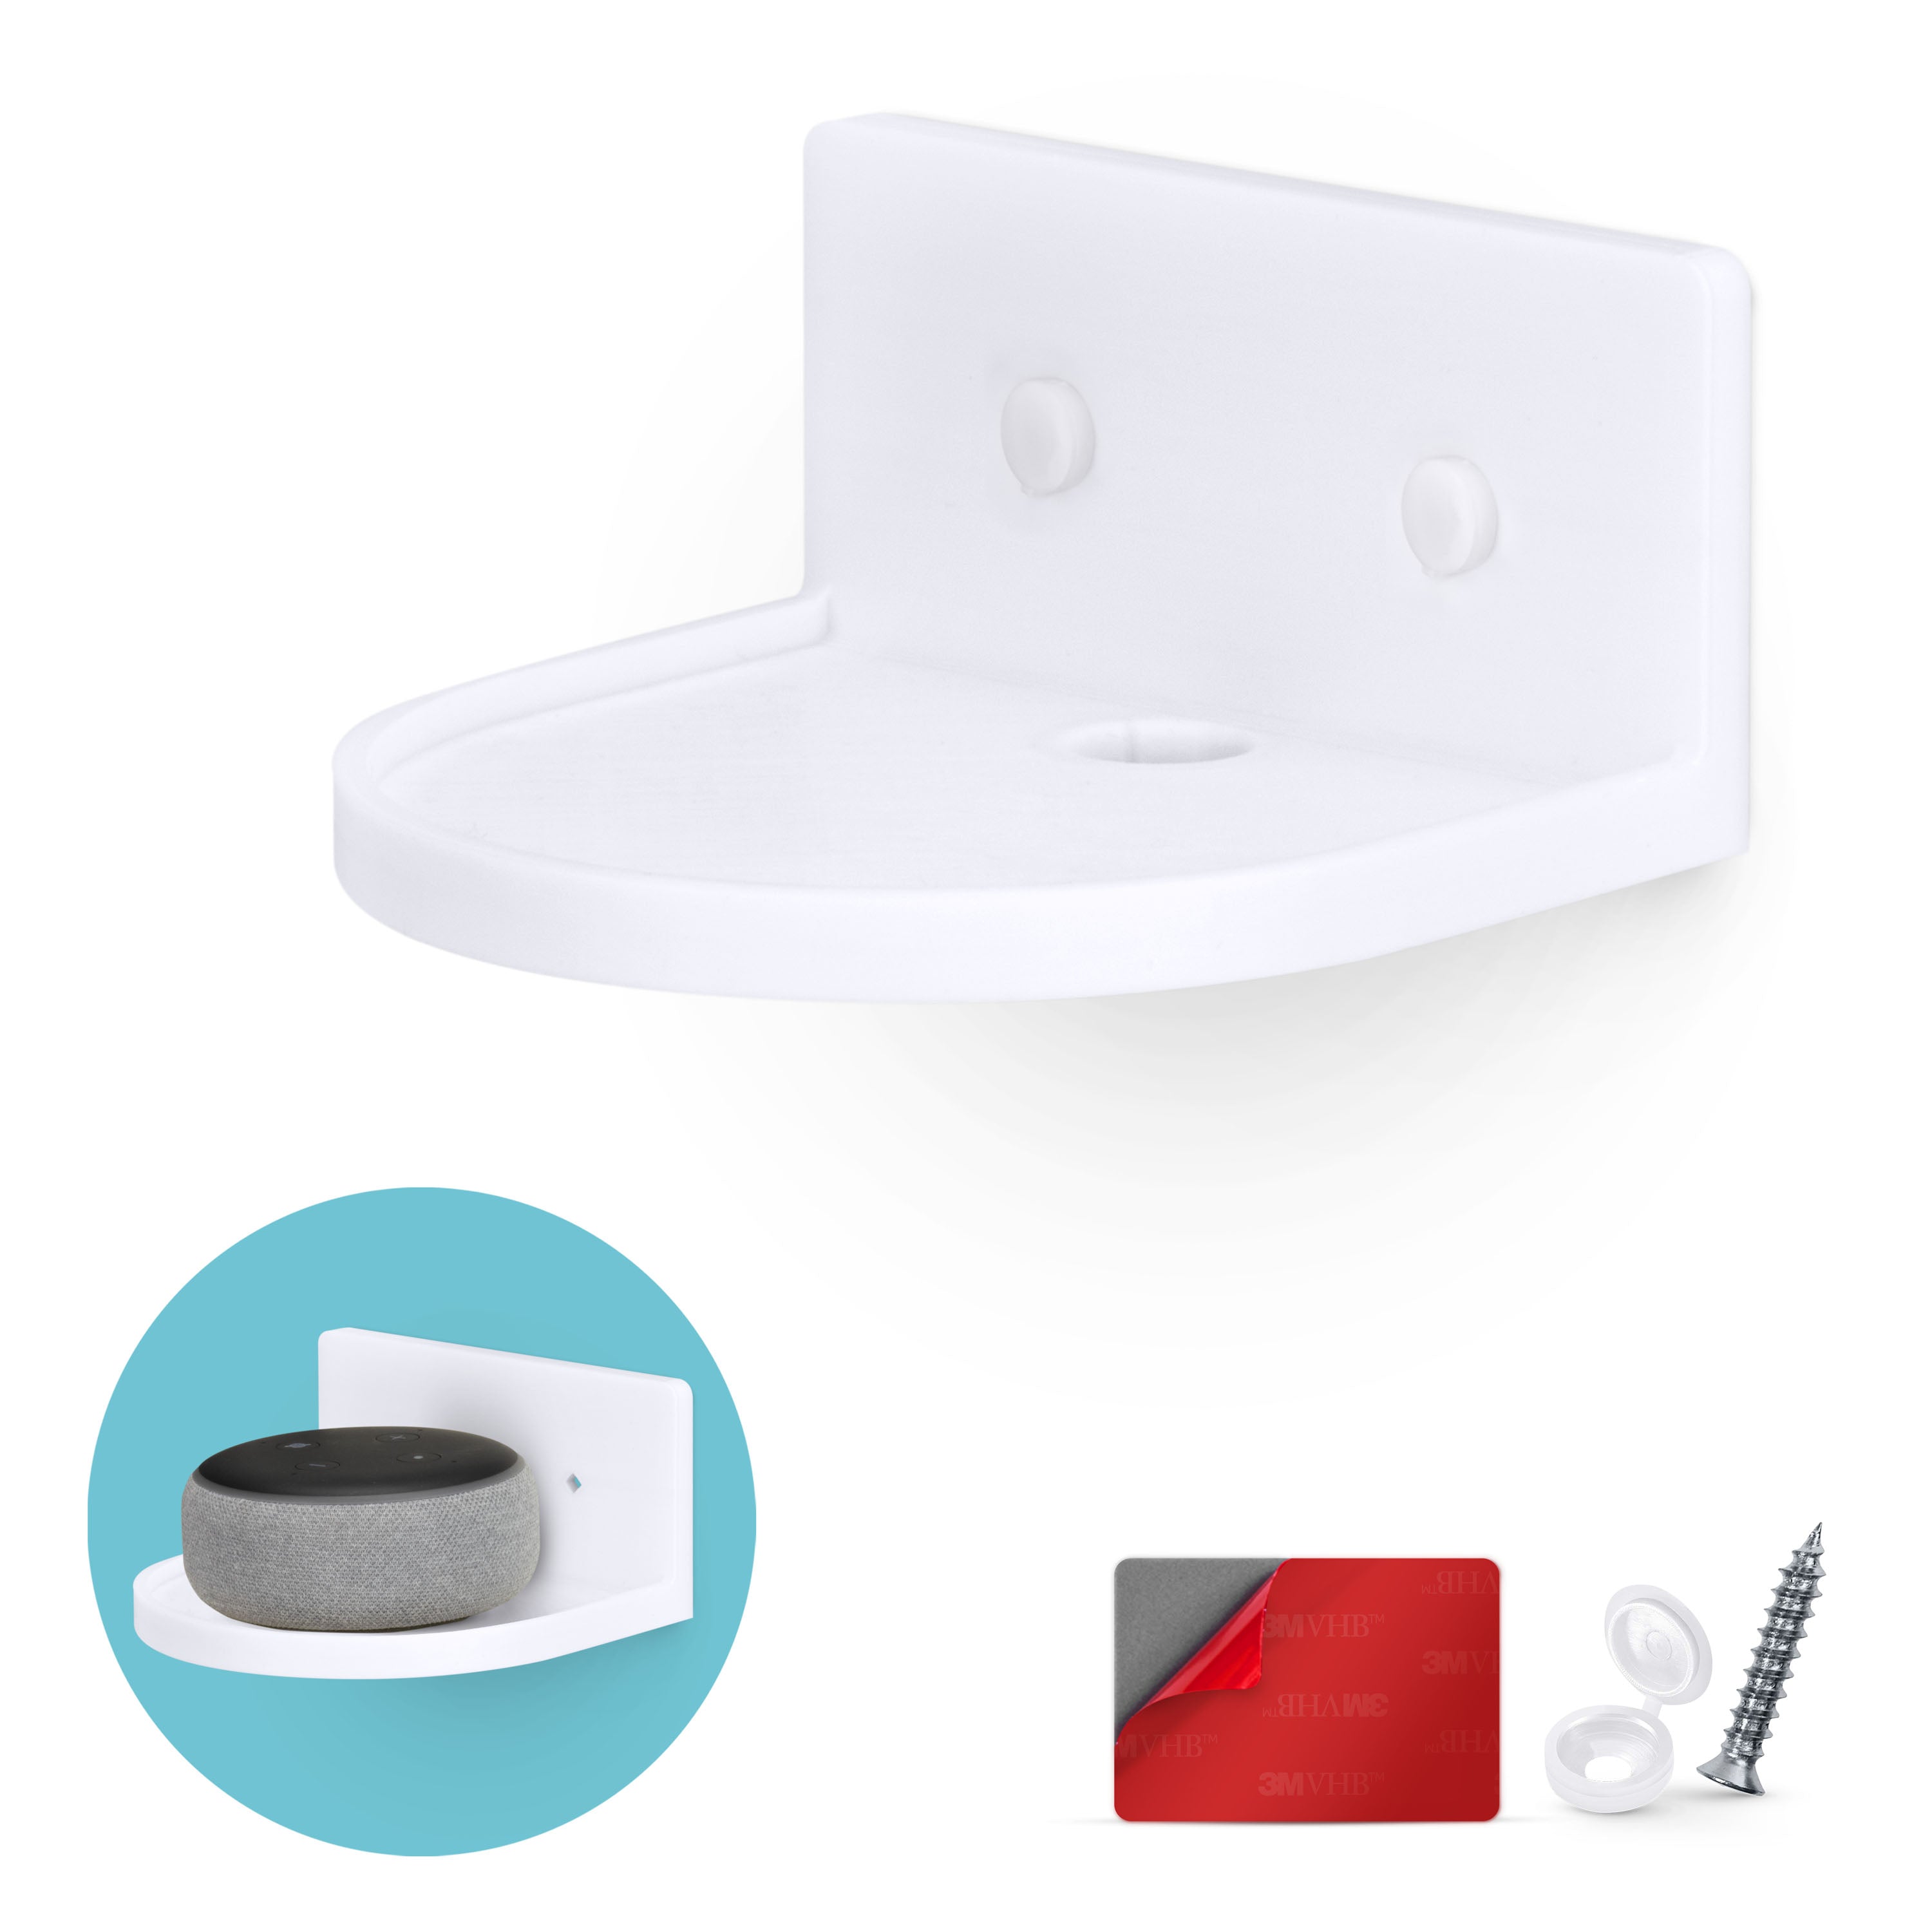 5” Small Floating Shelf, Adhesive & Screw in, for Bluetooth Speakers, Cameras, Plants, Books, Toys & More, Universal Shelves, Easy to Install